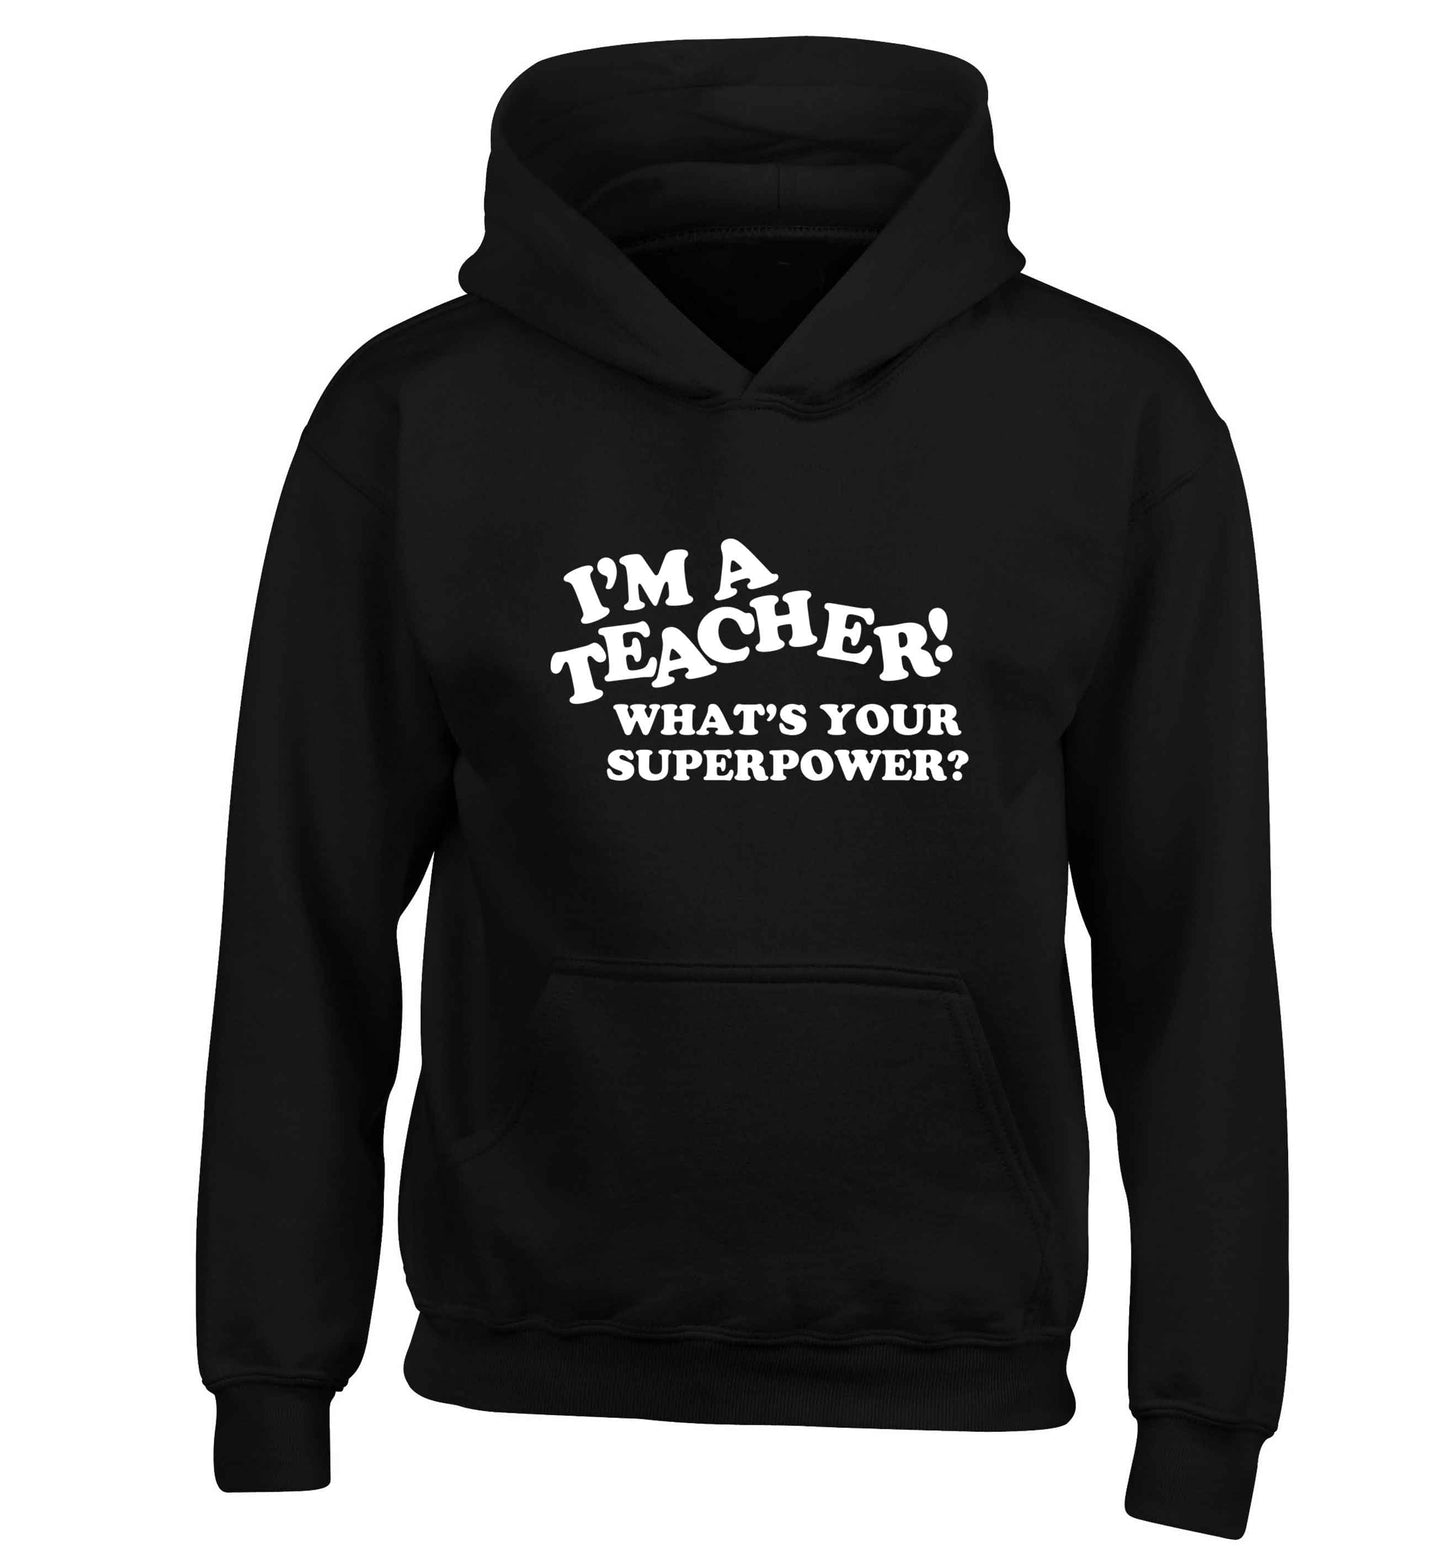 I'm a teacher what's your superpower?! children's black hoodie 12-13 Years